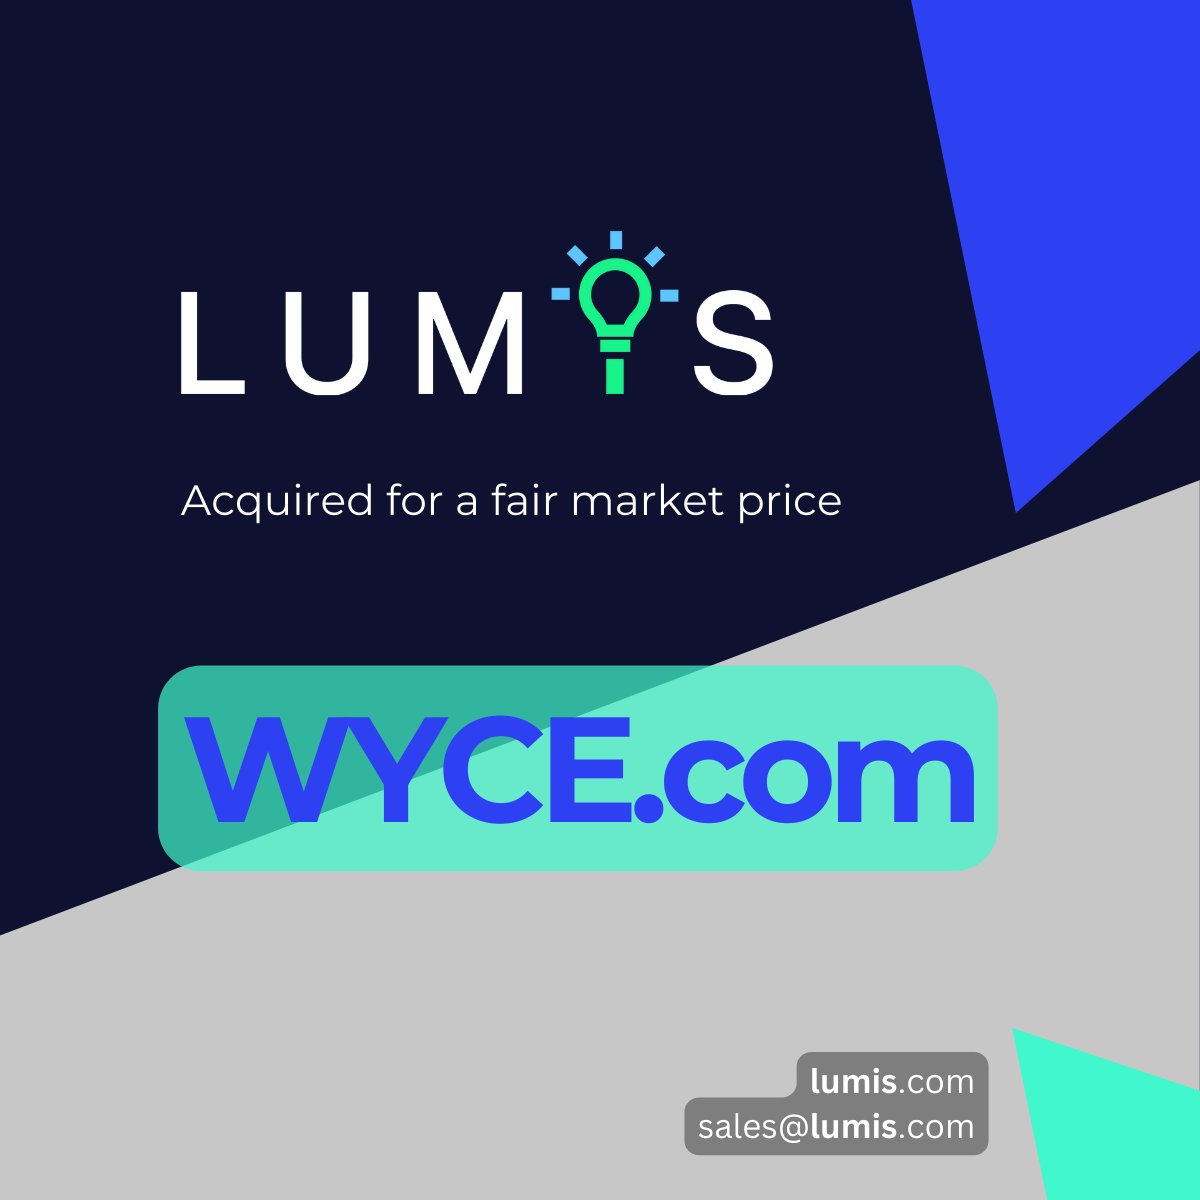 WYCE.com has been acquired!

#Lumis